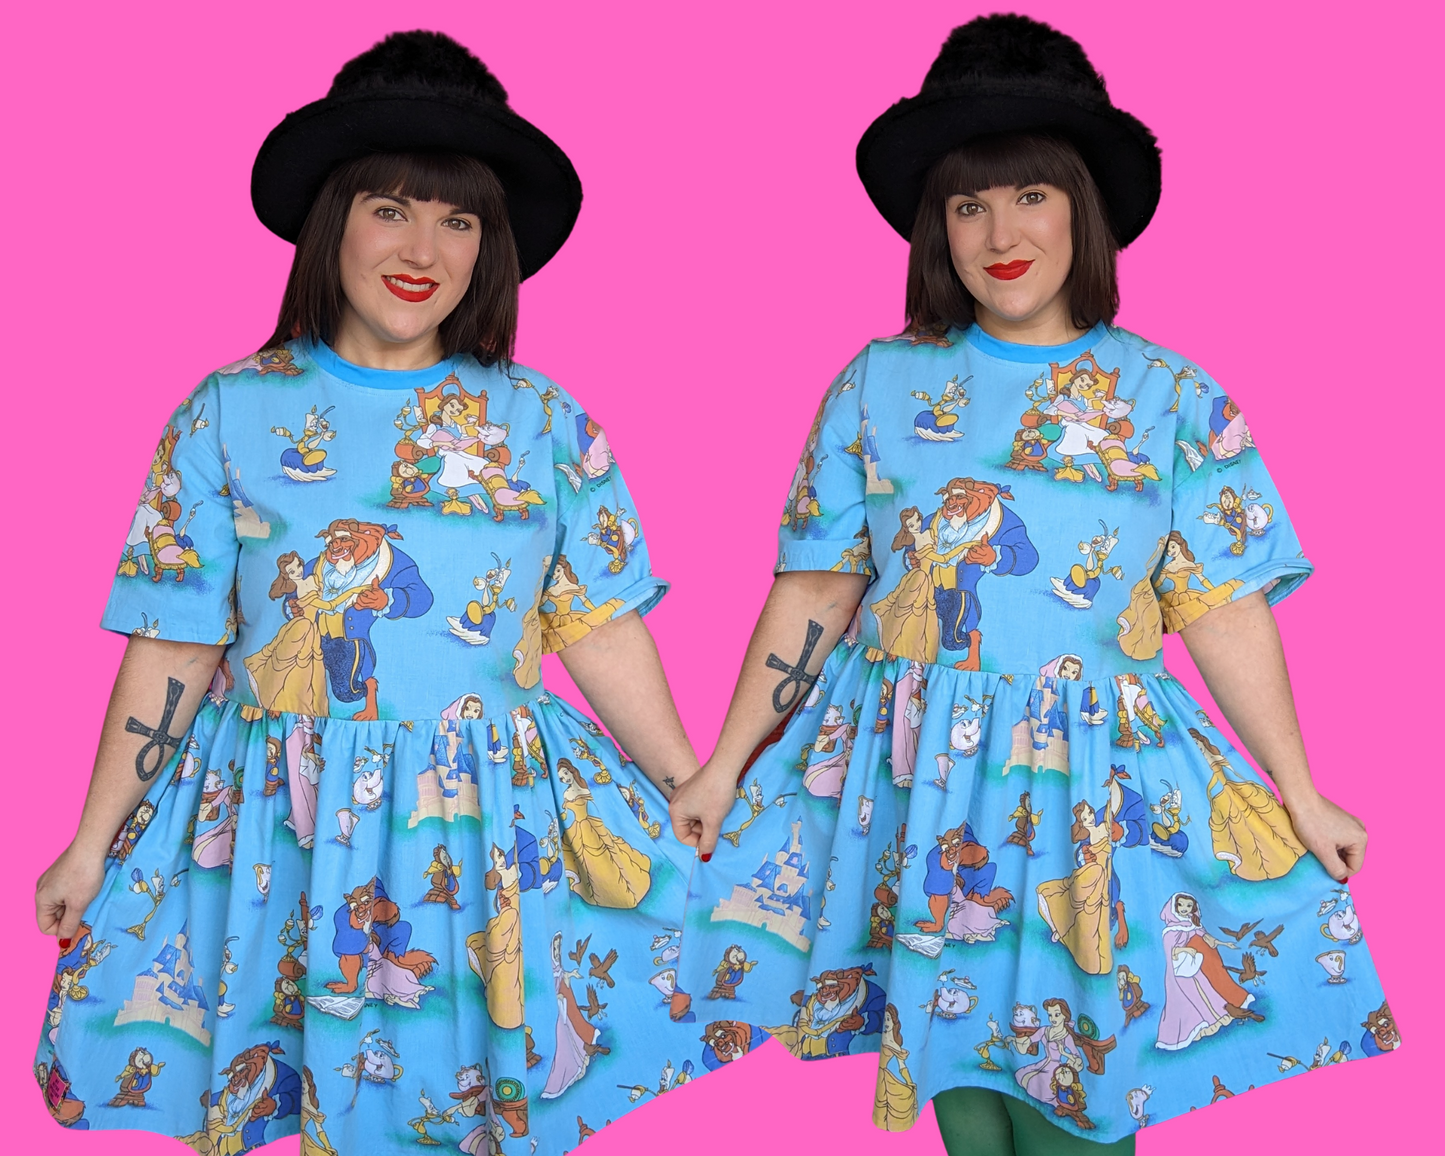 Handmade, Upcycled Disney Beauty and the Beast Bedsheet T-Shirt Dress Fits S-M-L-XL